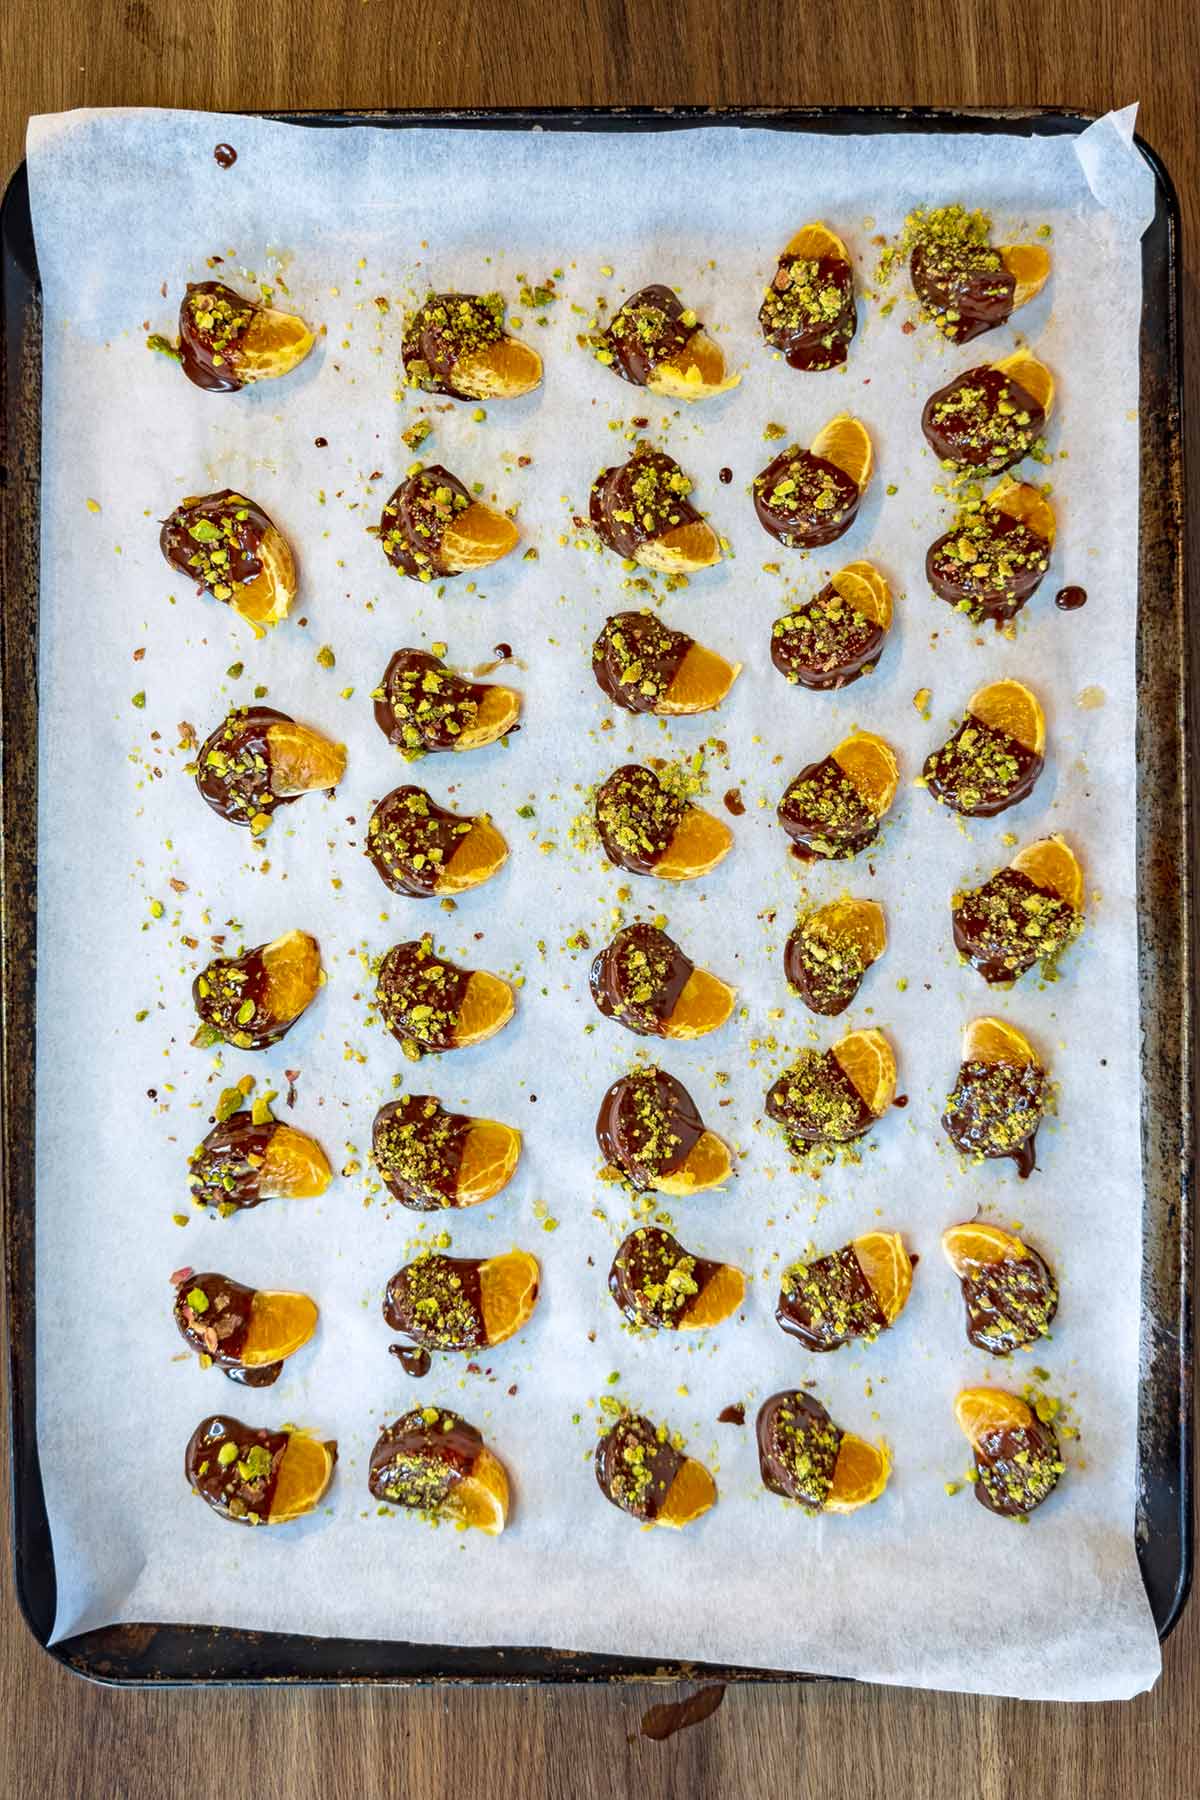 The satsuma segments half covered in chocolate and and sprinkled with crushed pistachios.